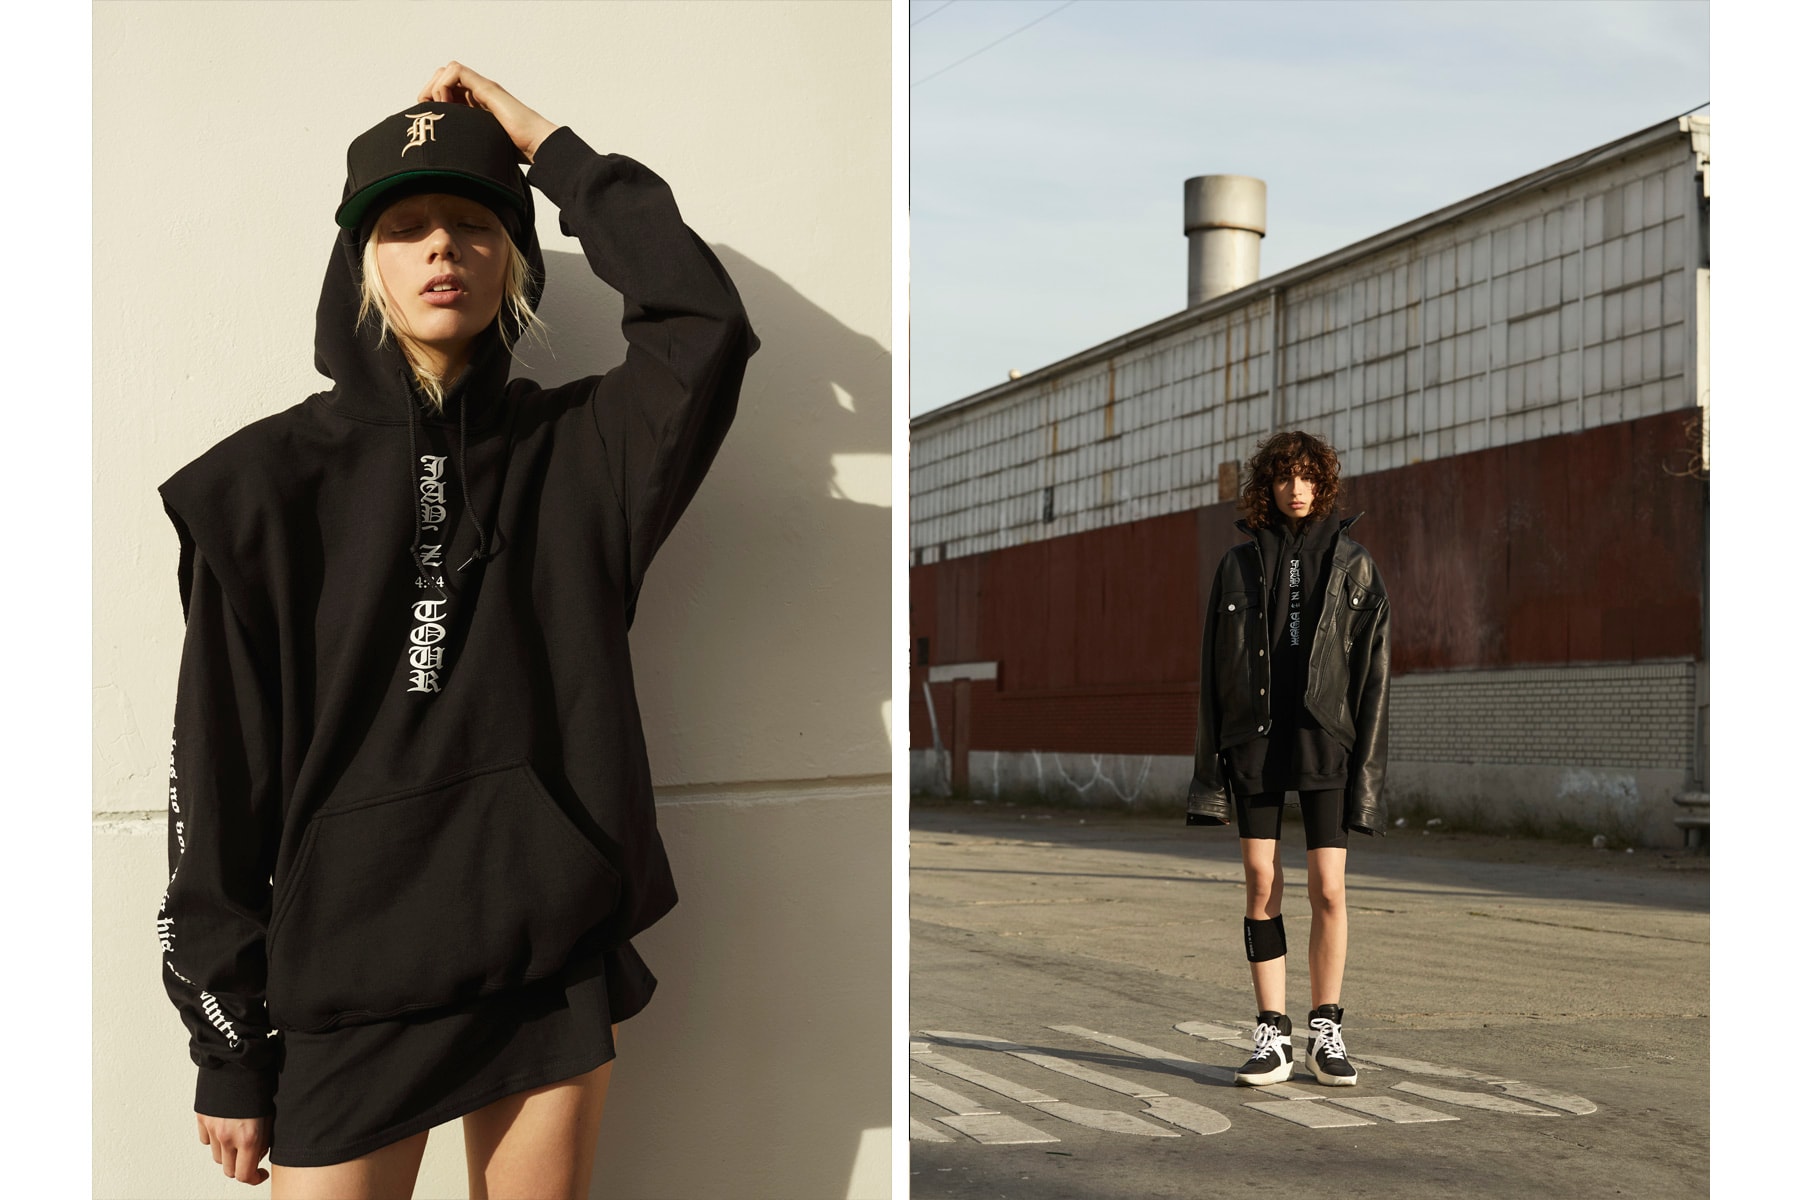 Fear of God JAY Z 4 44 Collection Lookbook